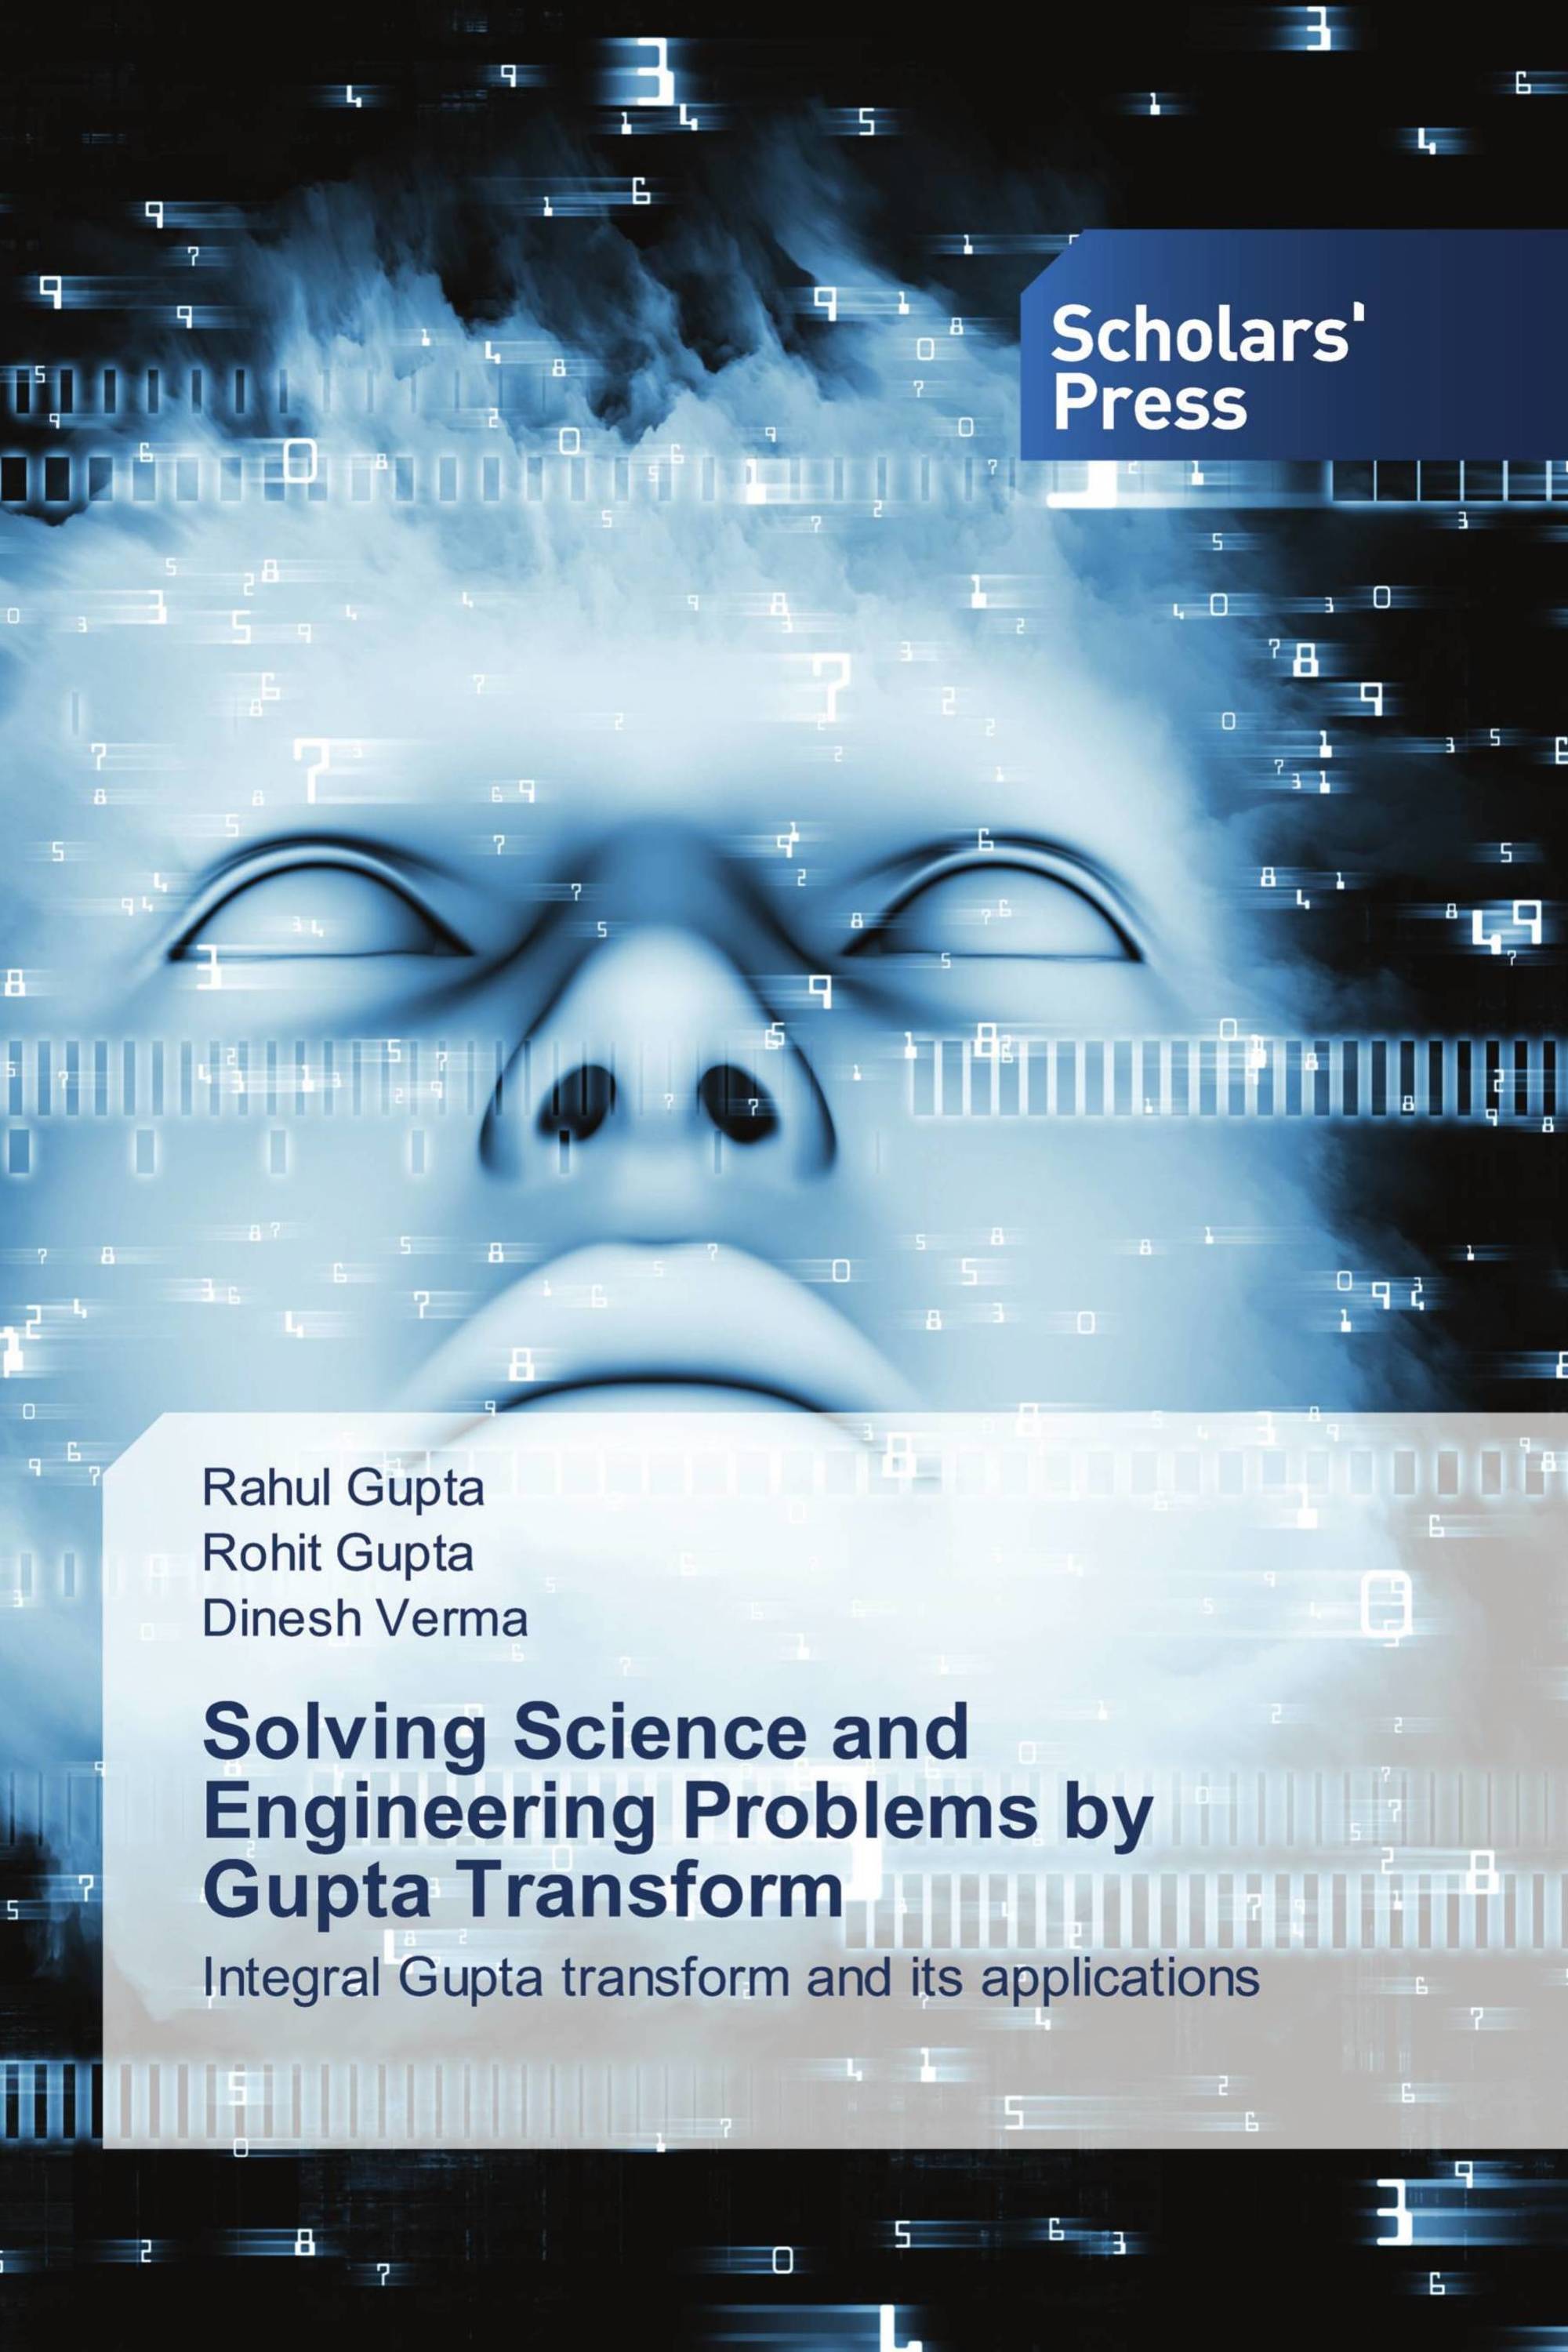 Solving Science and Engineering Problems by Gupta Transform